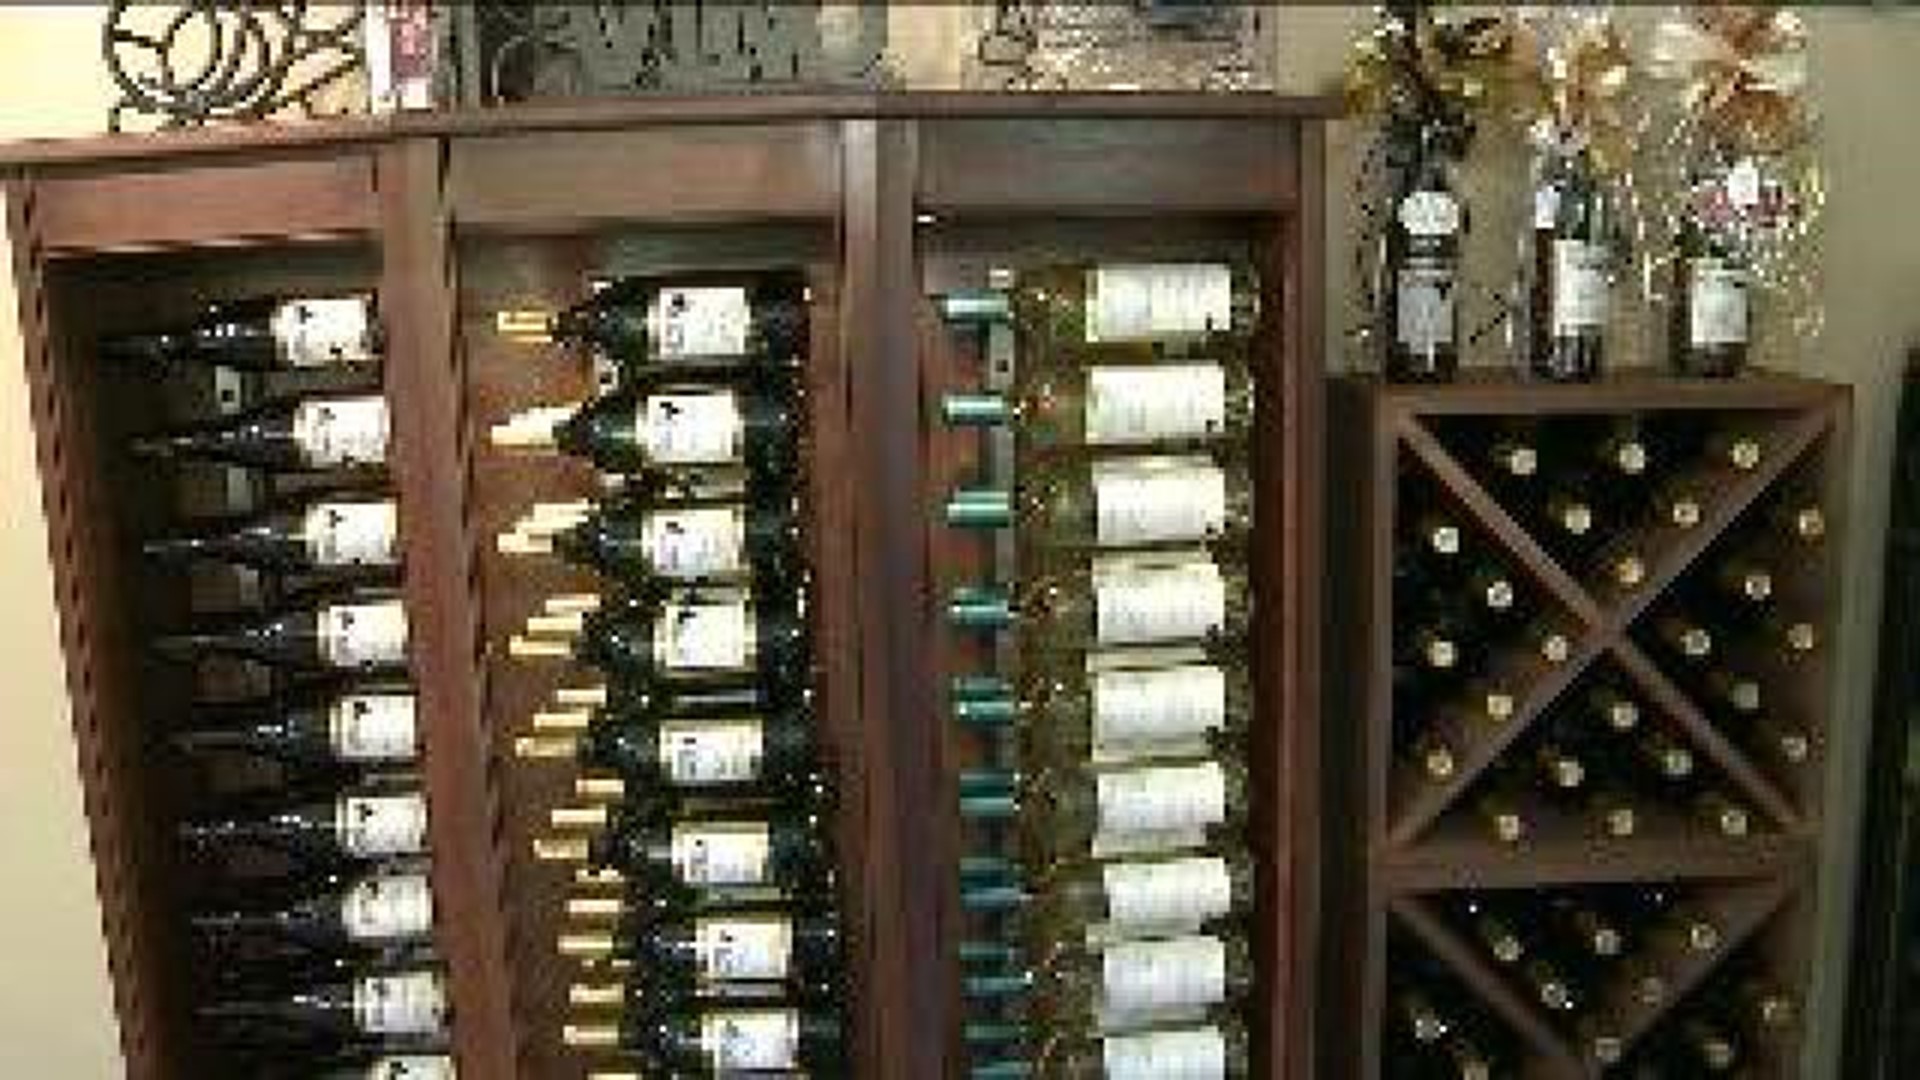 State Changes Rules For PA Winemakers